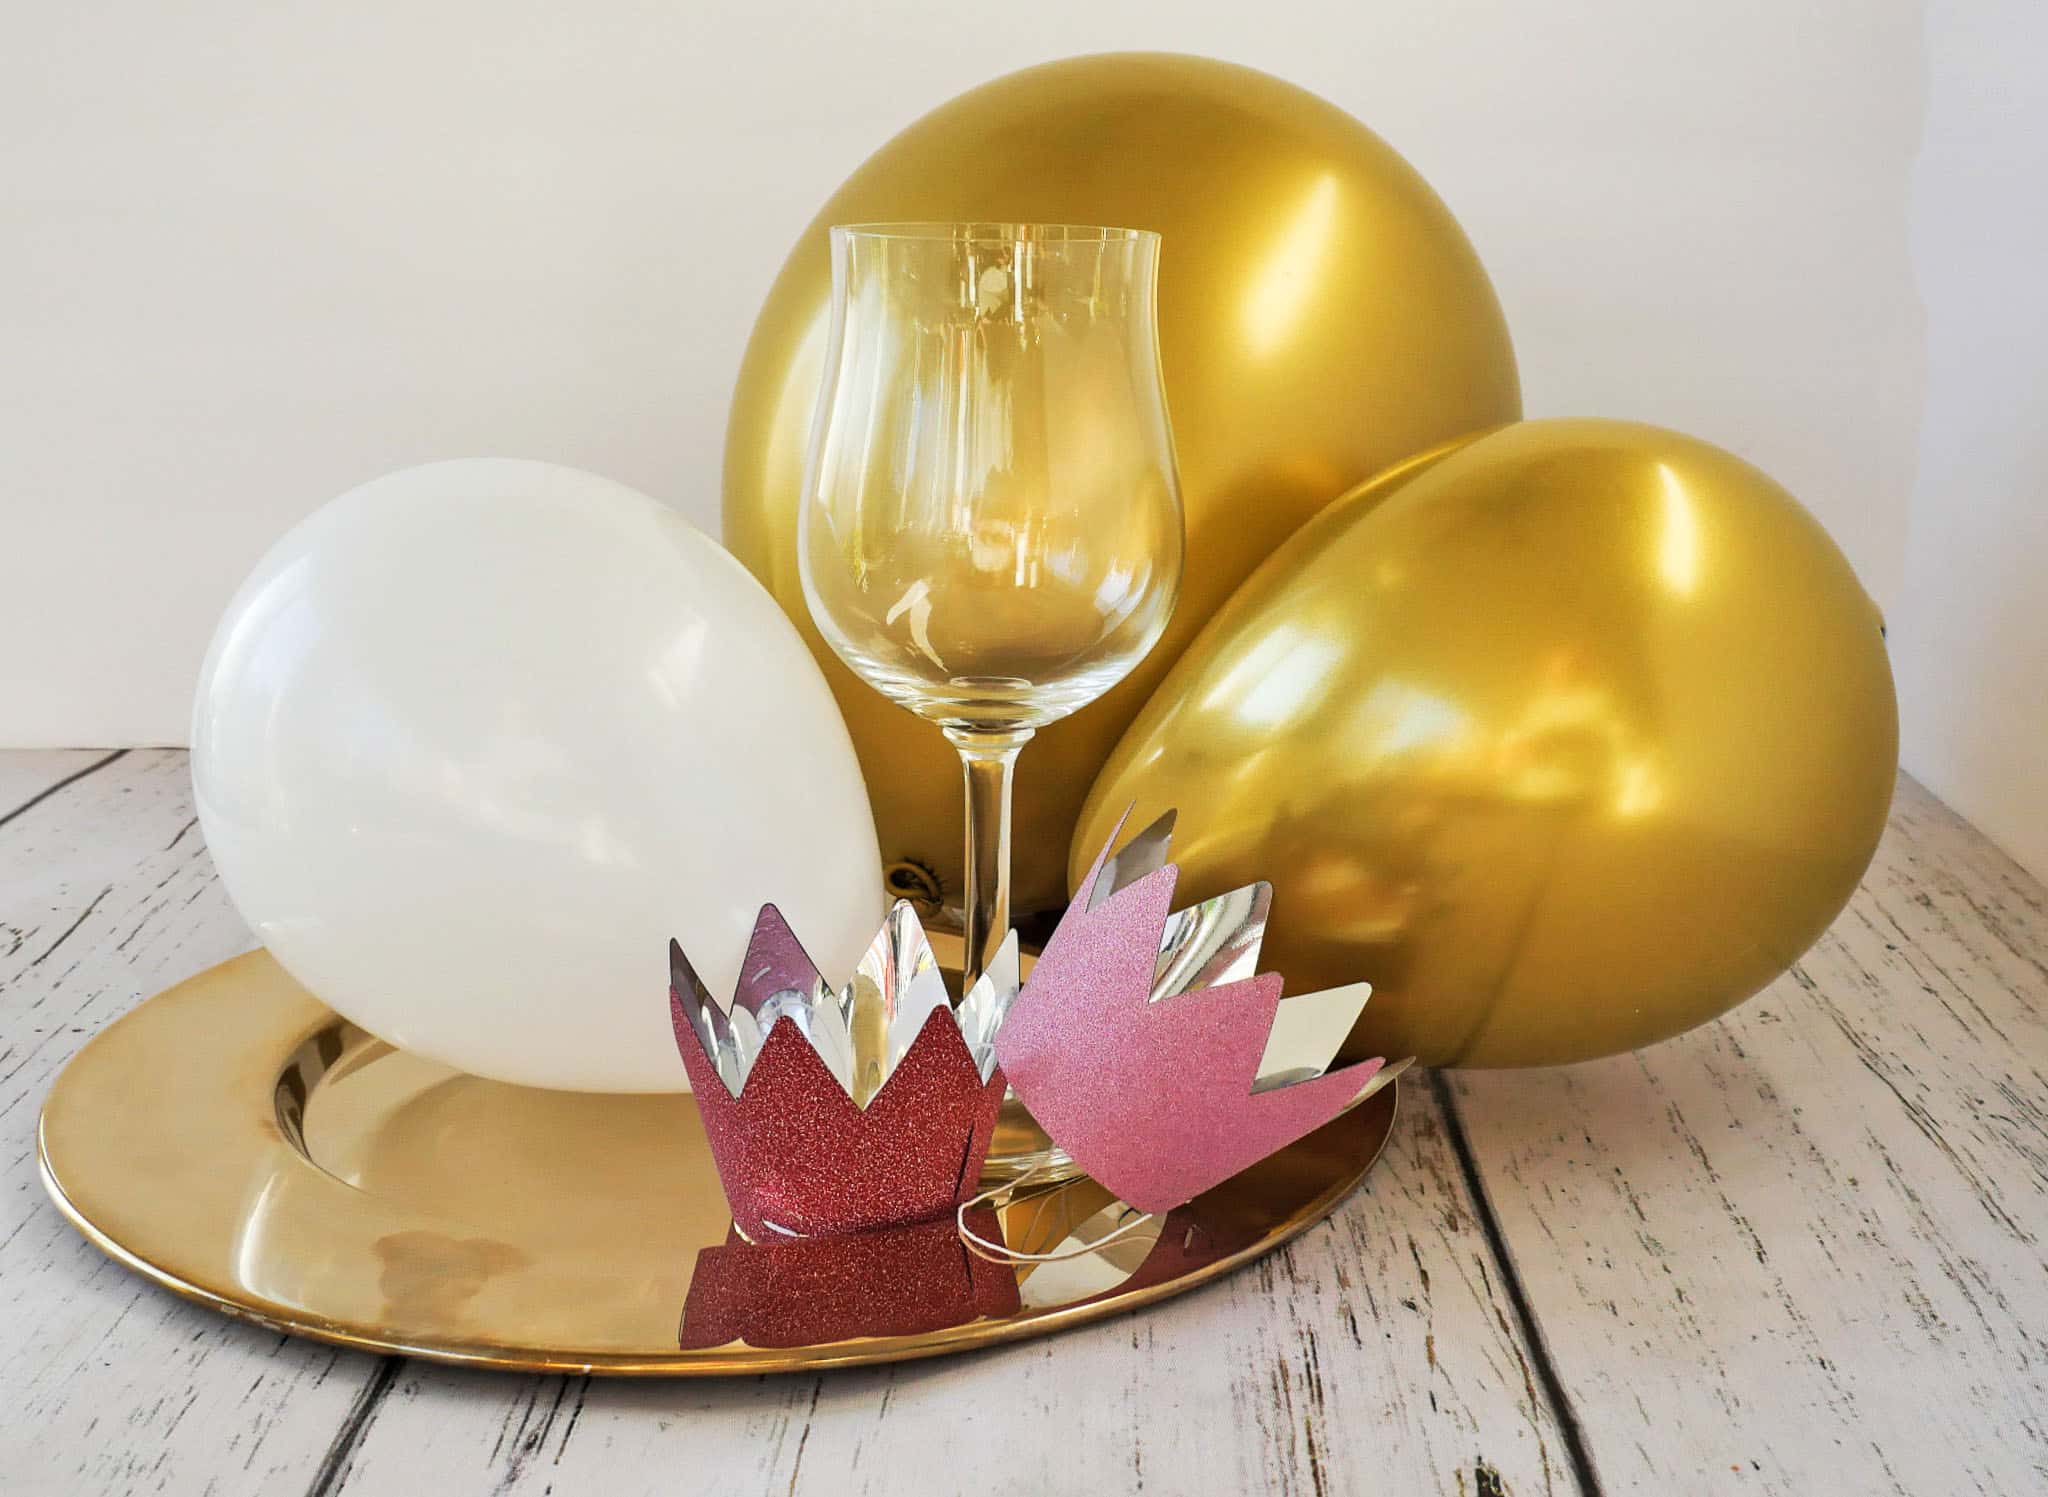 Balloons and wine glass on tray